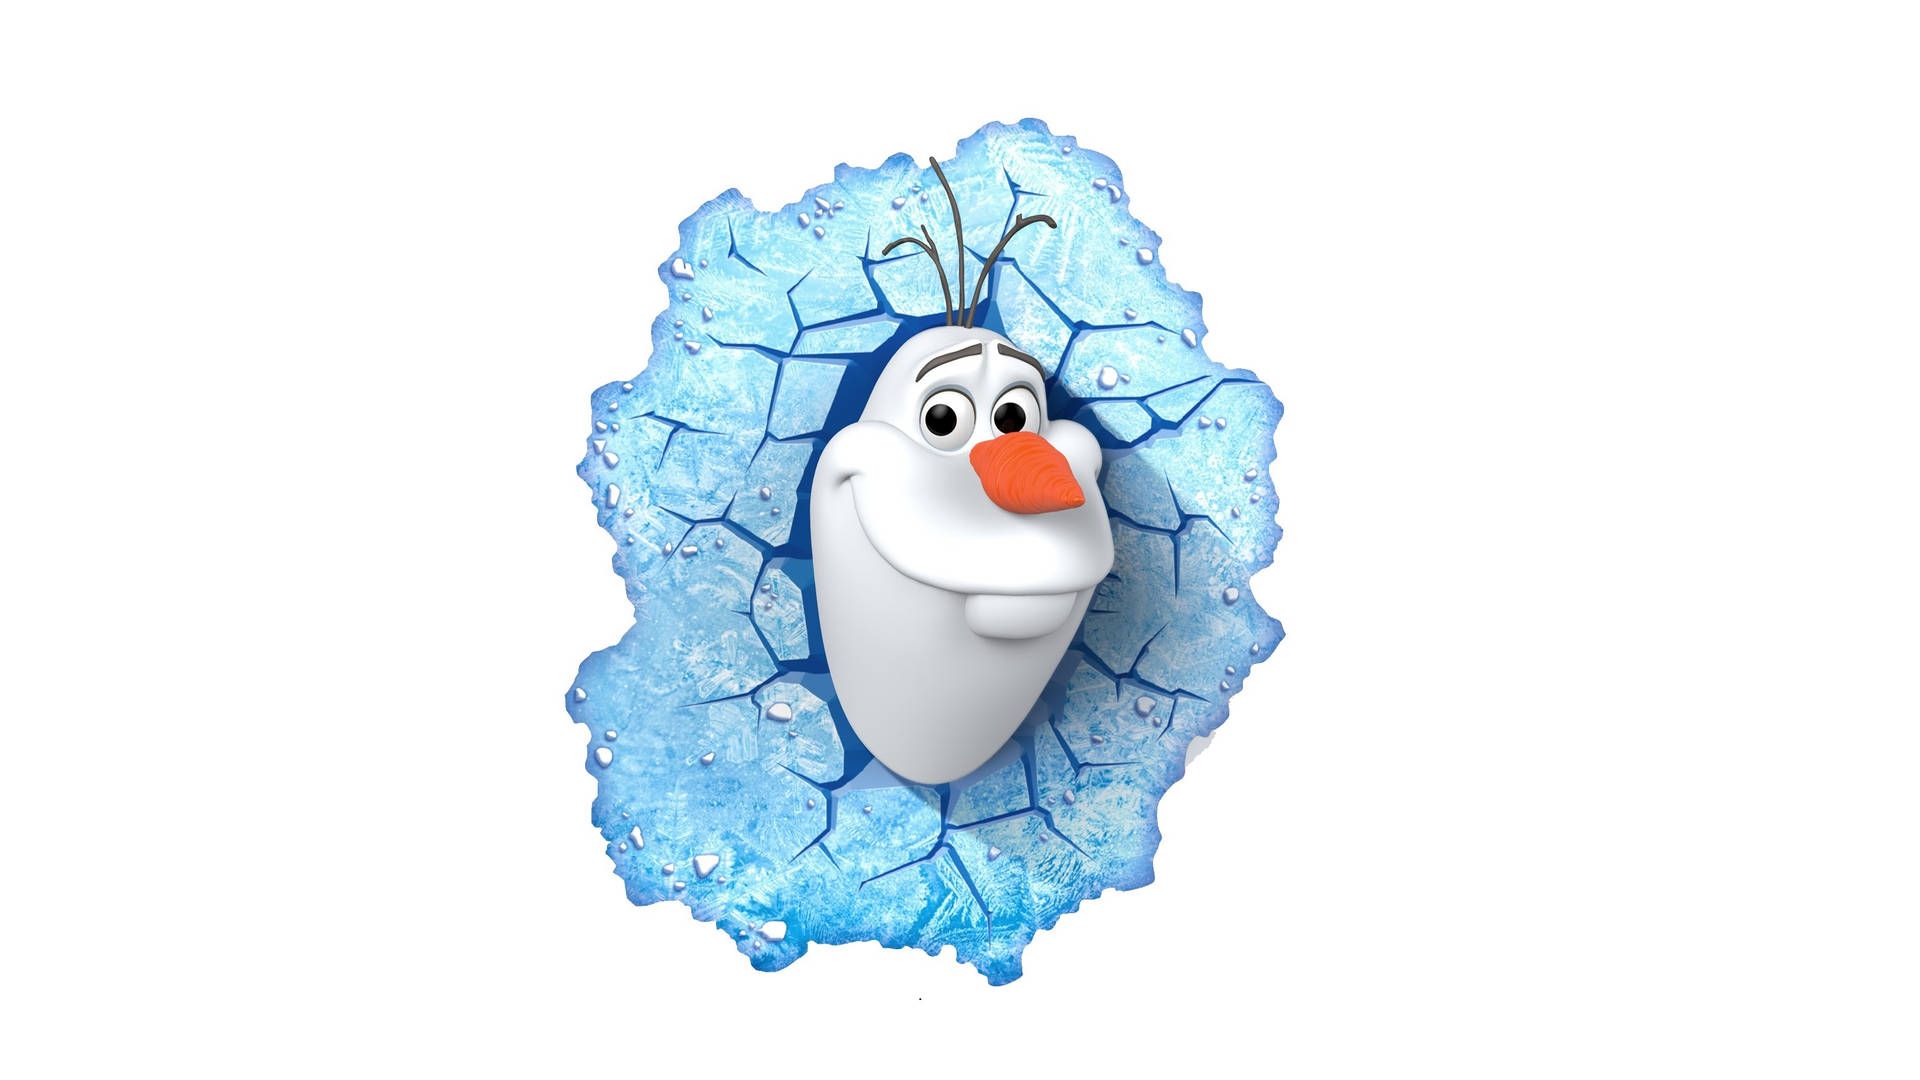 A frozen character is in the ice - Olaf